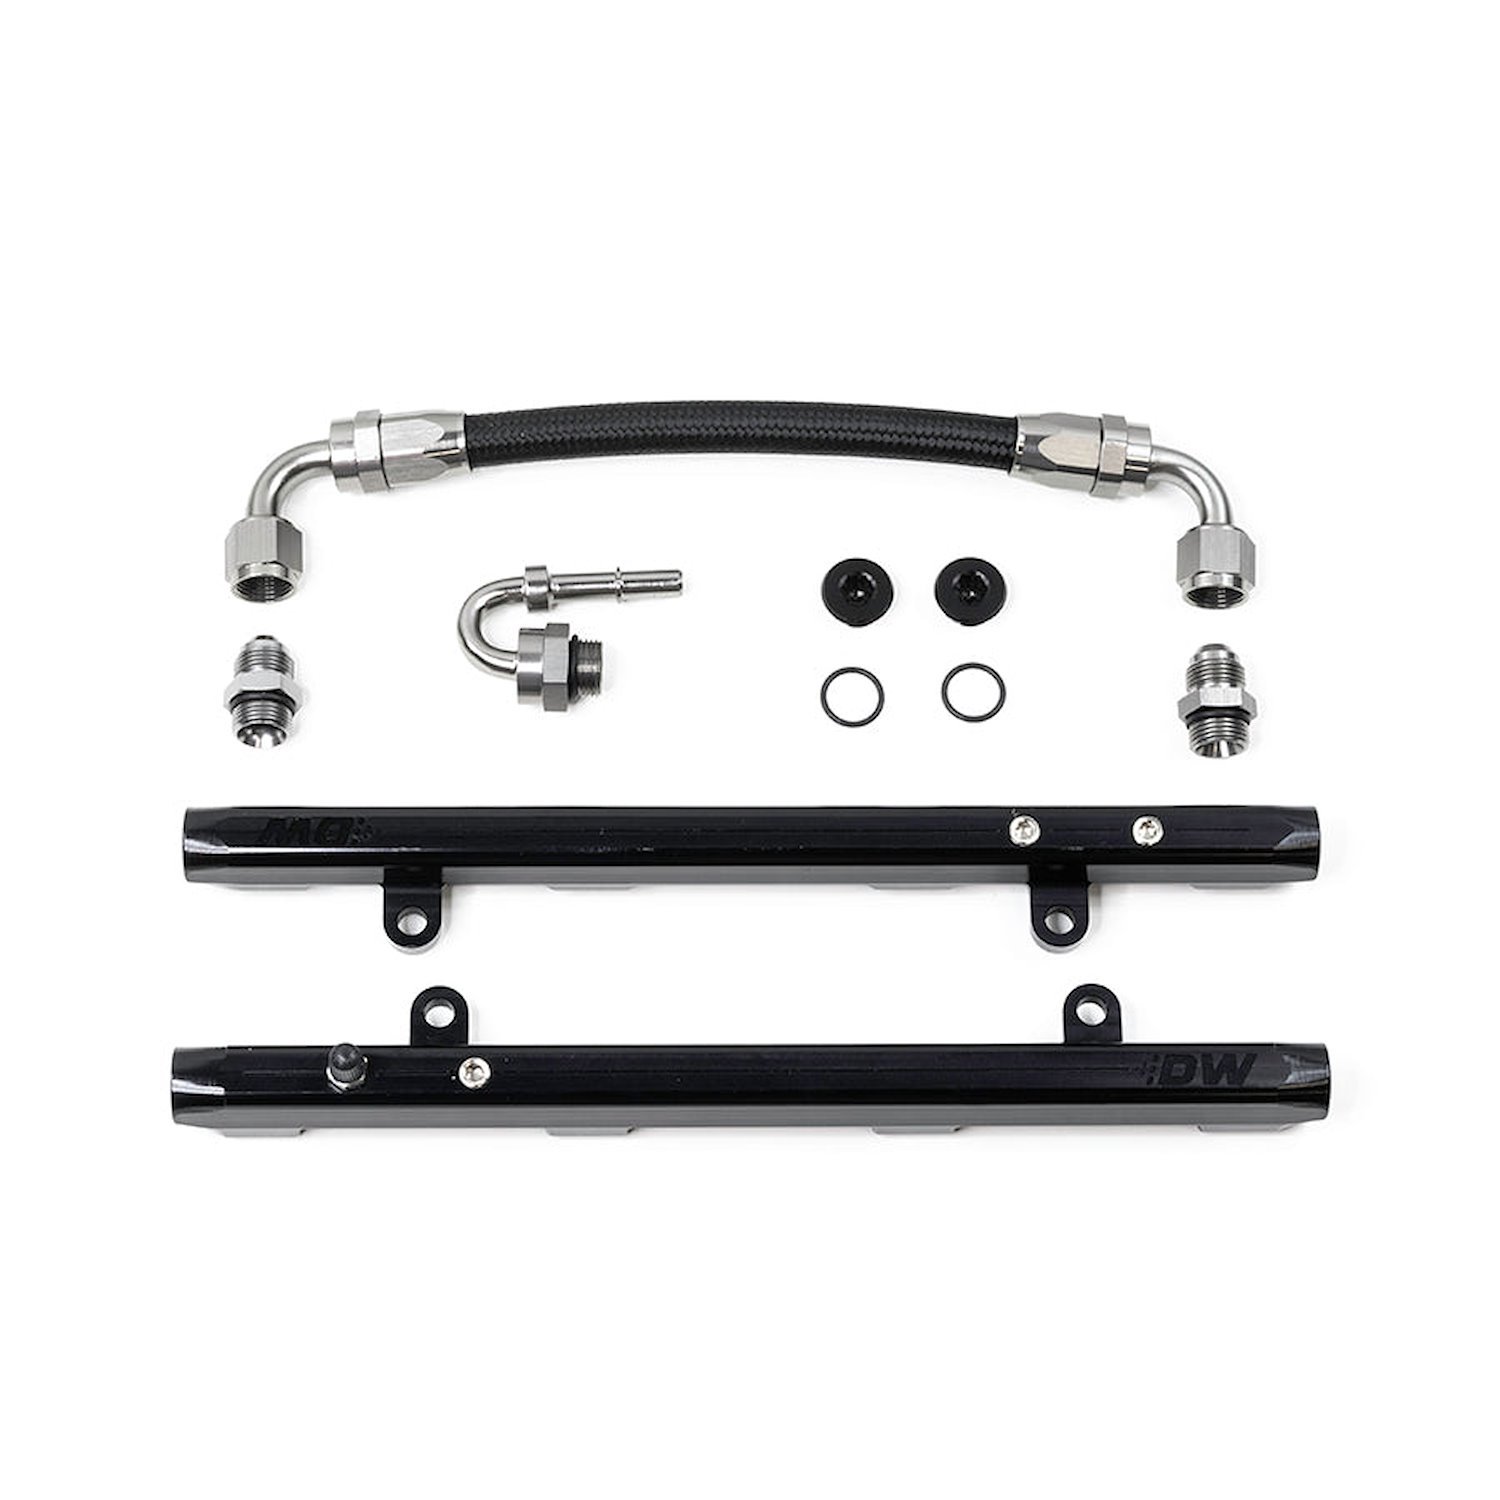 7301OE Coyote 5.0 Fuel Rails with Crossover for 2011-21 Ford Mustang 5.0 2011-17 F-150 5.0